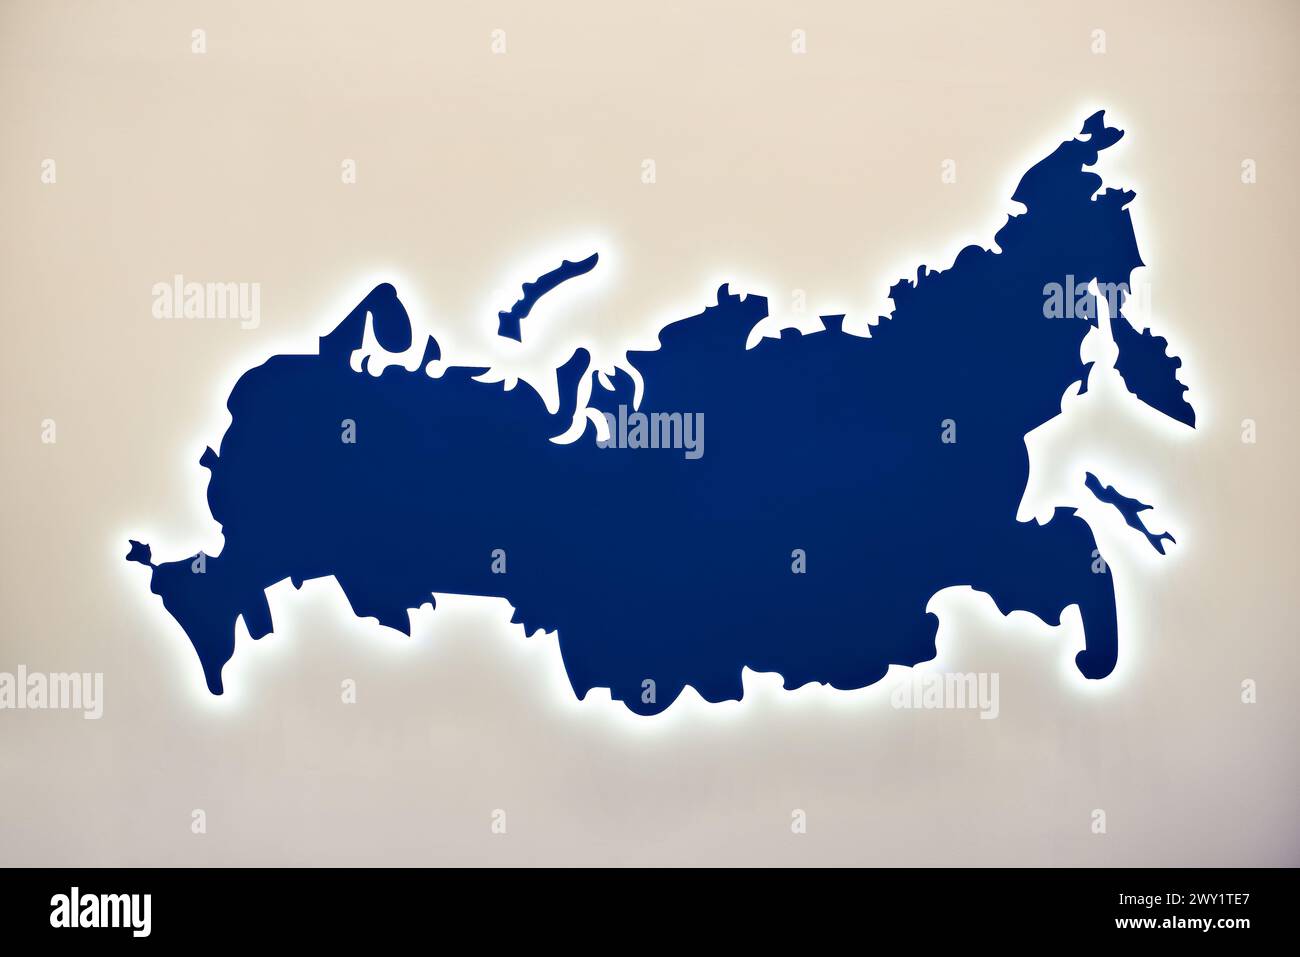 Abstract image of a map of Russia Stock Photo